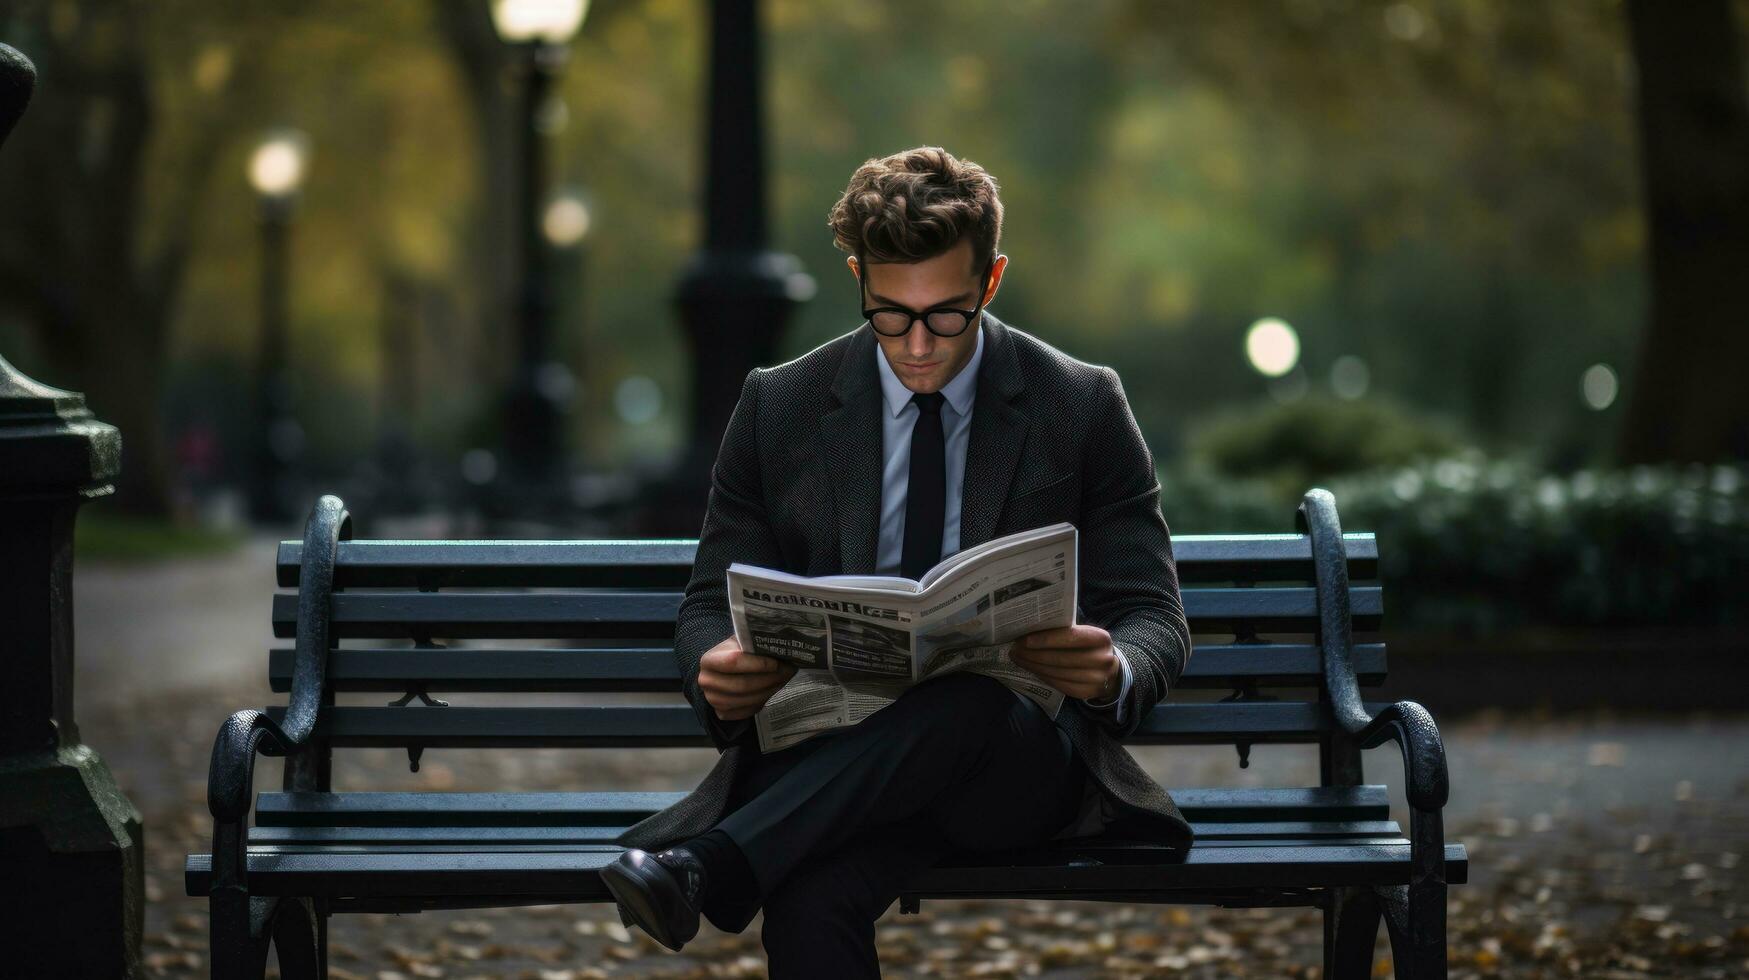 Man reading newspaper on a park bench photo